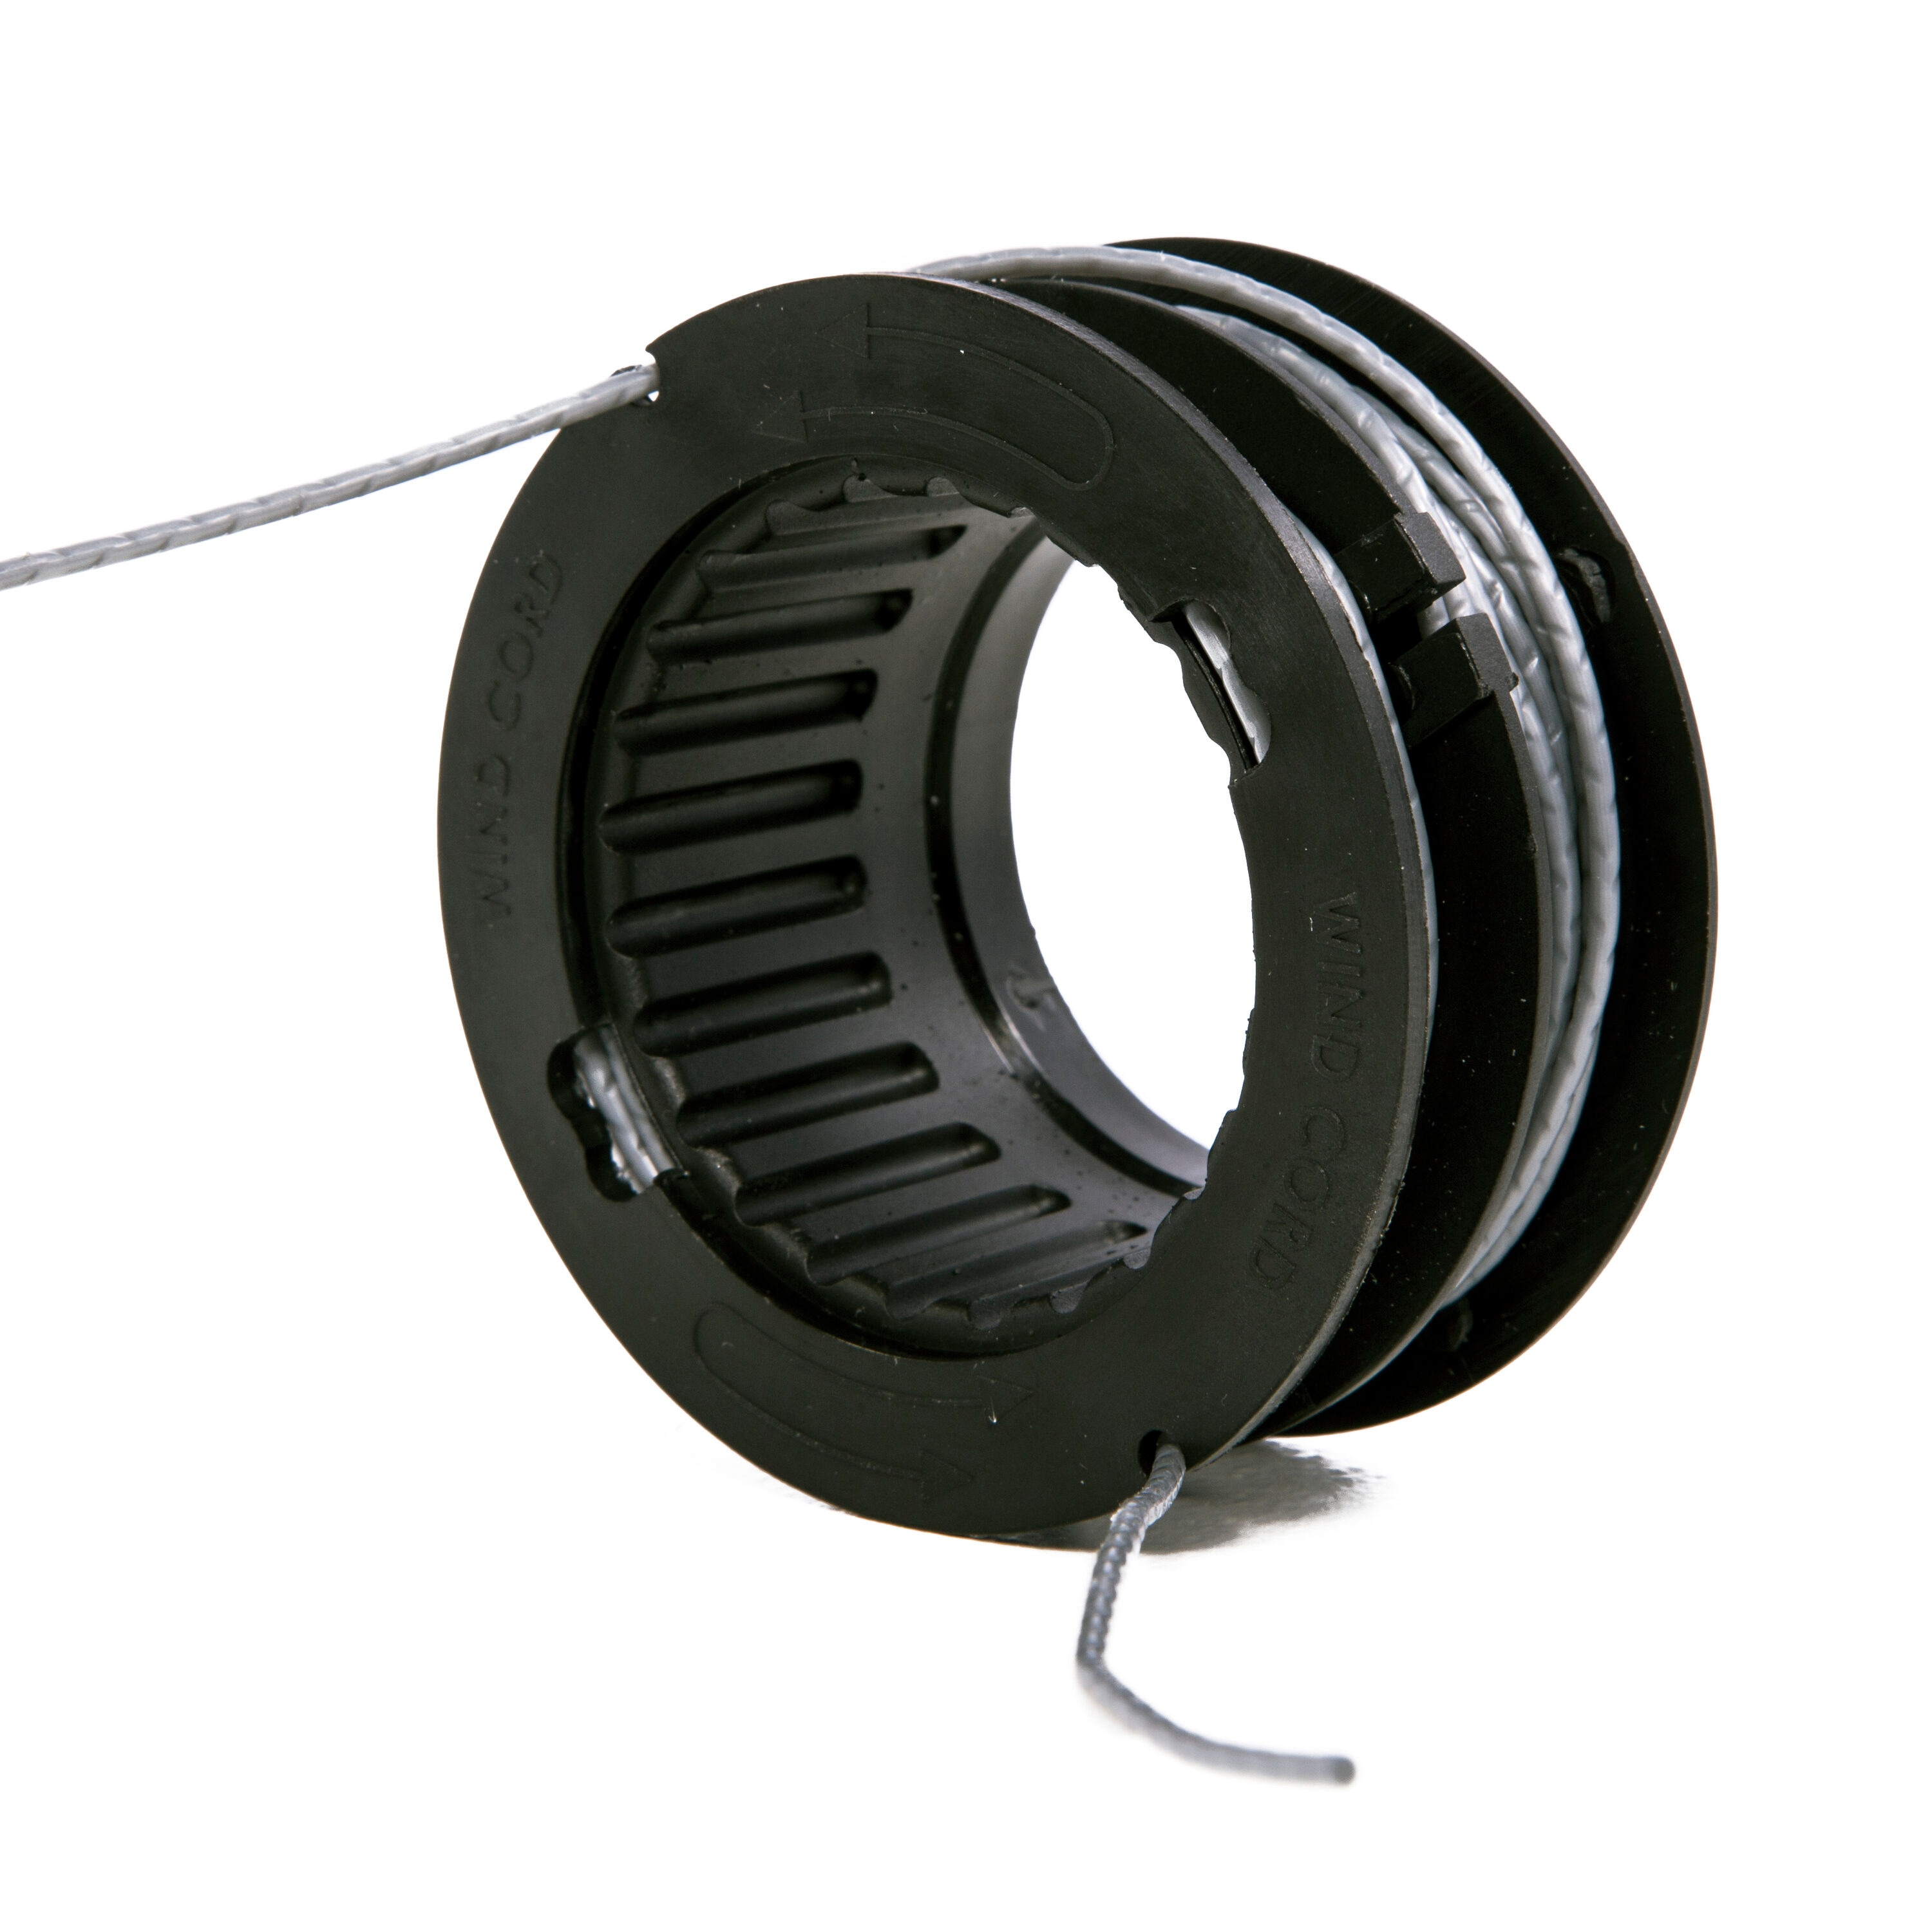 MaxPower Weed Trimmer Replacement Spool and Line, 0.06 in. x 31 ft